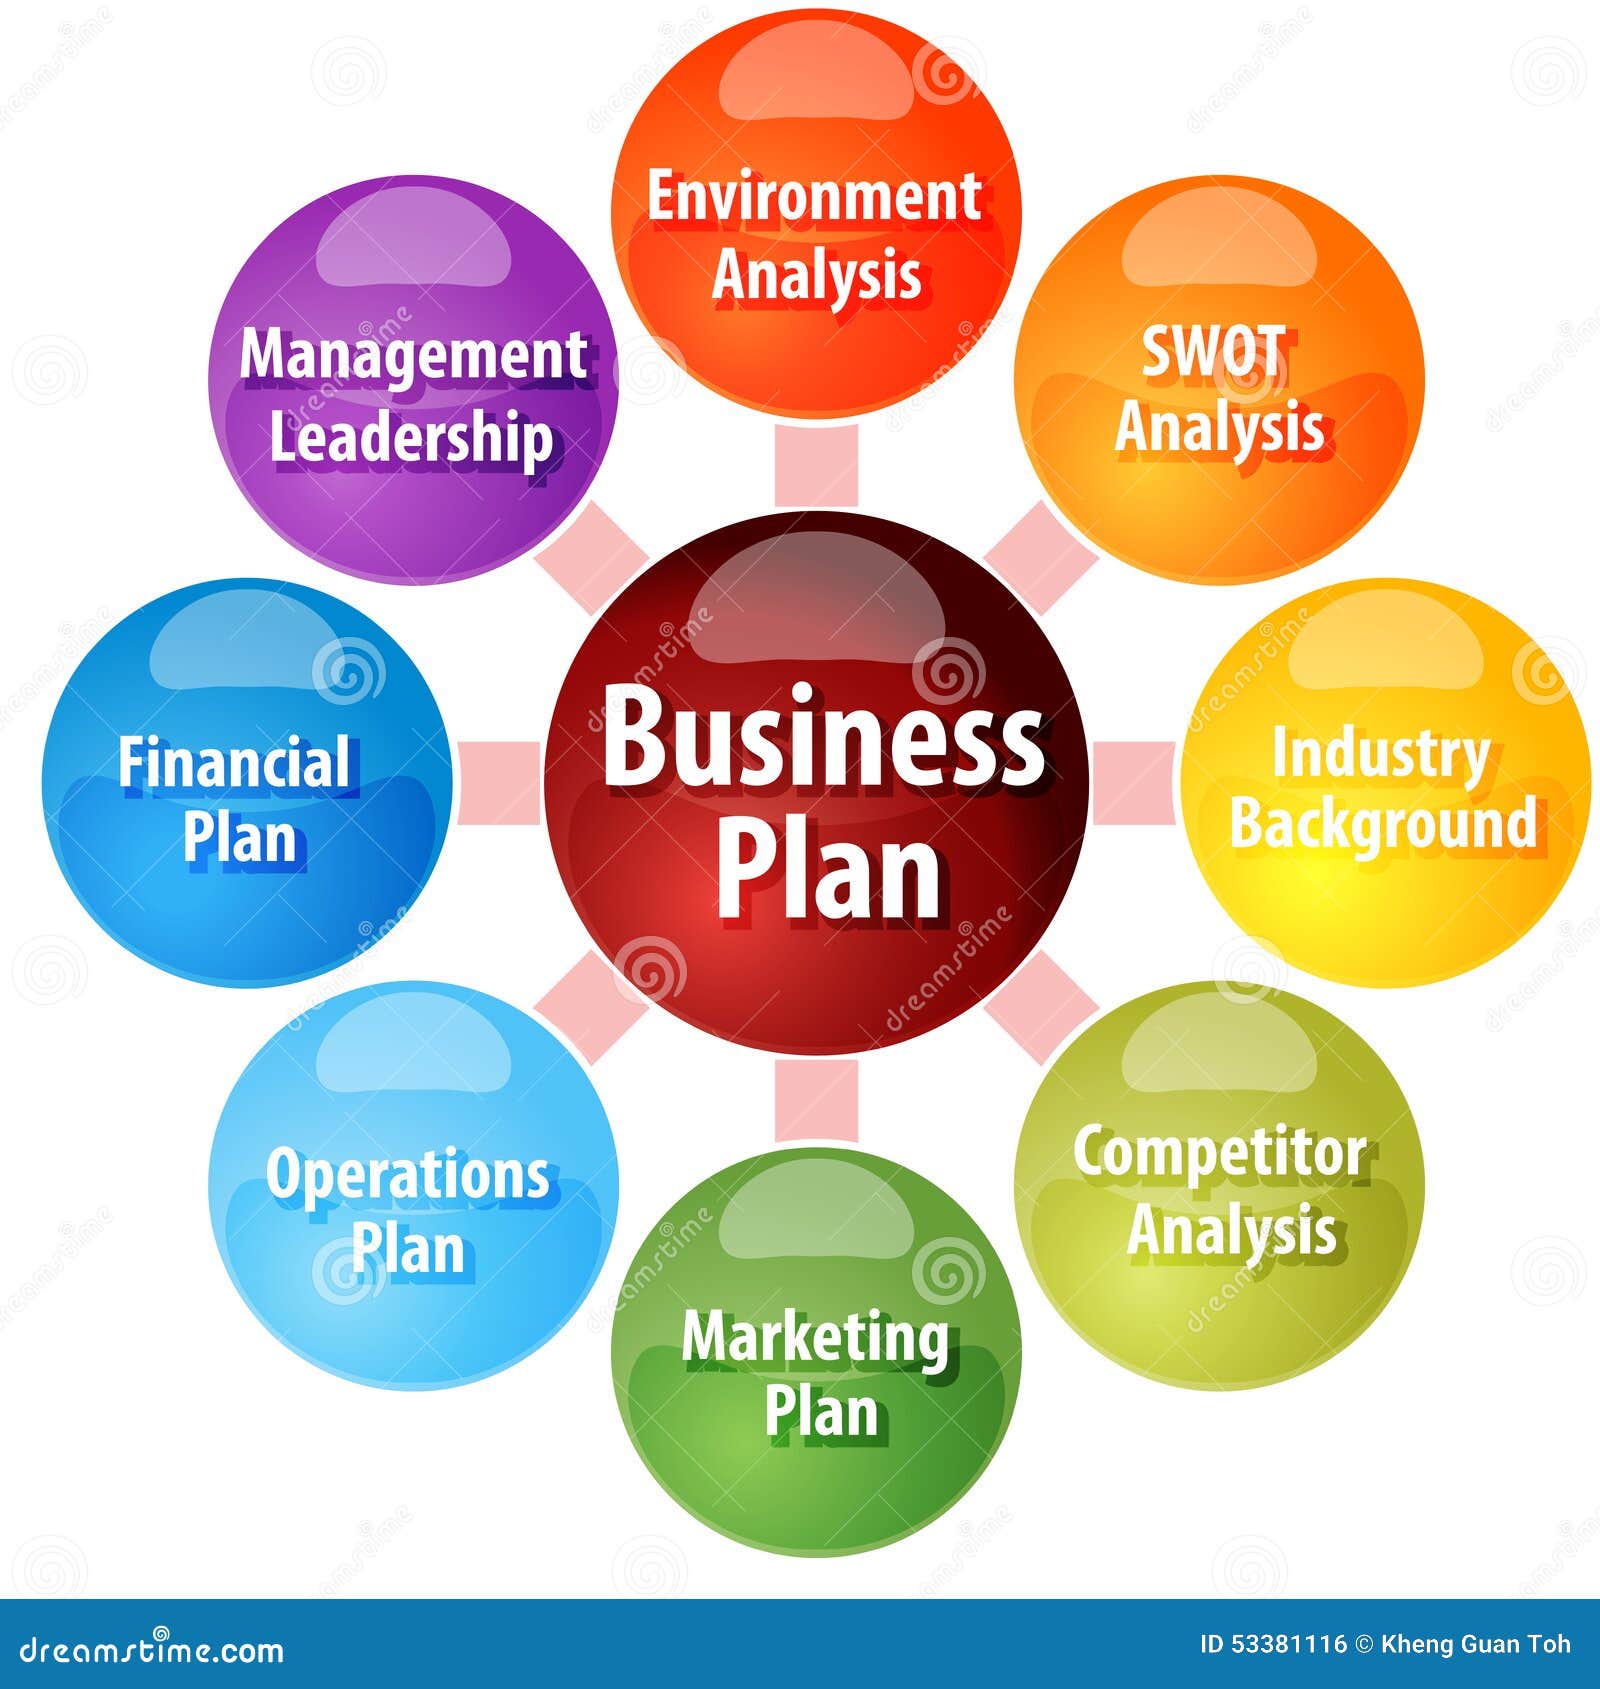 enumerate the seven key components of a business plan